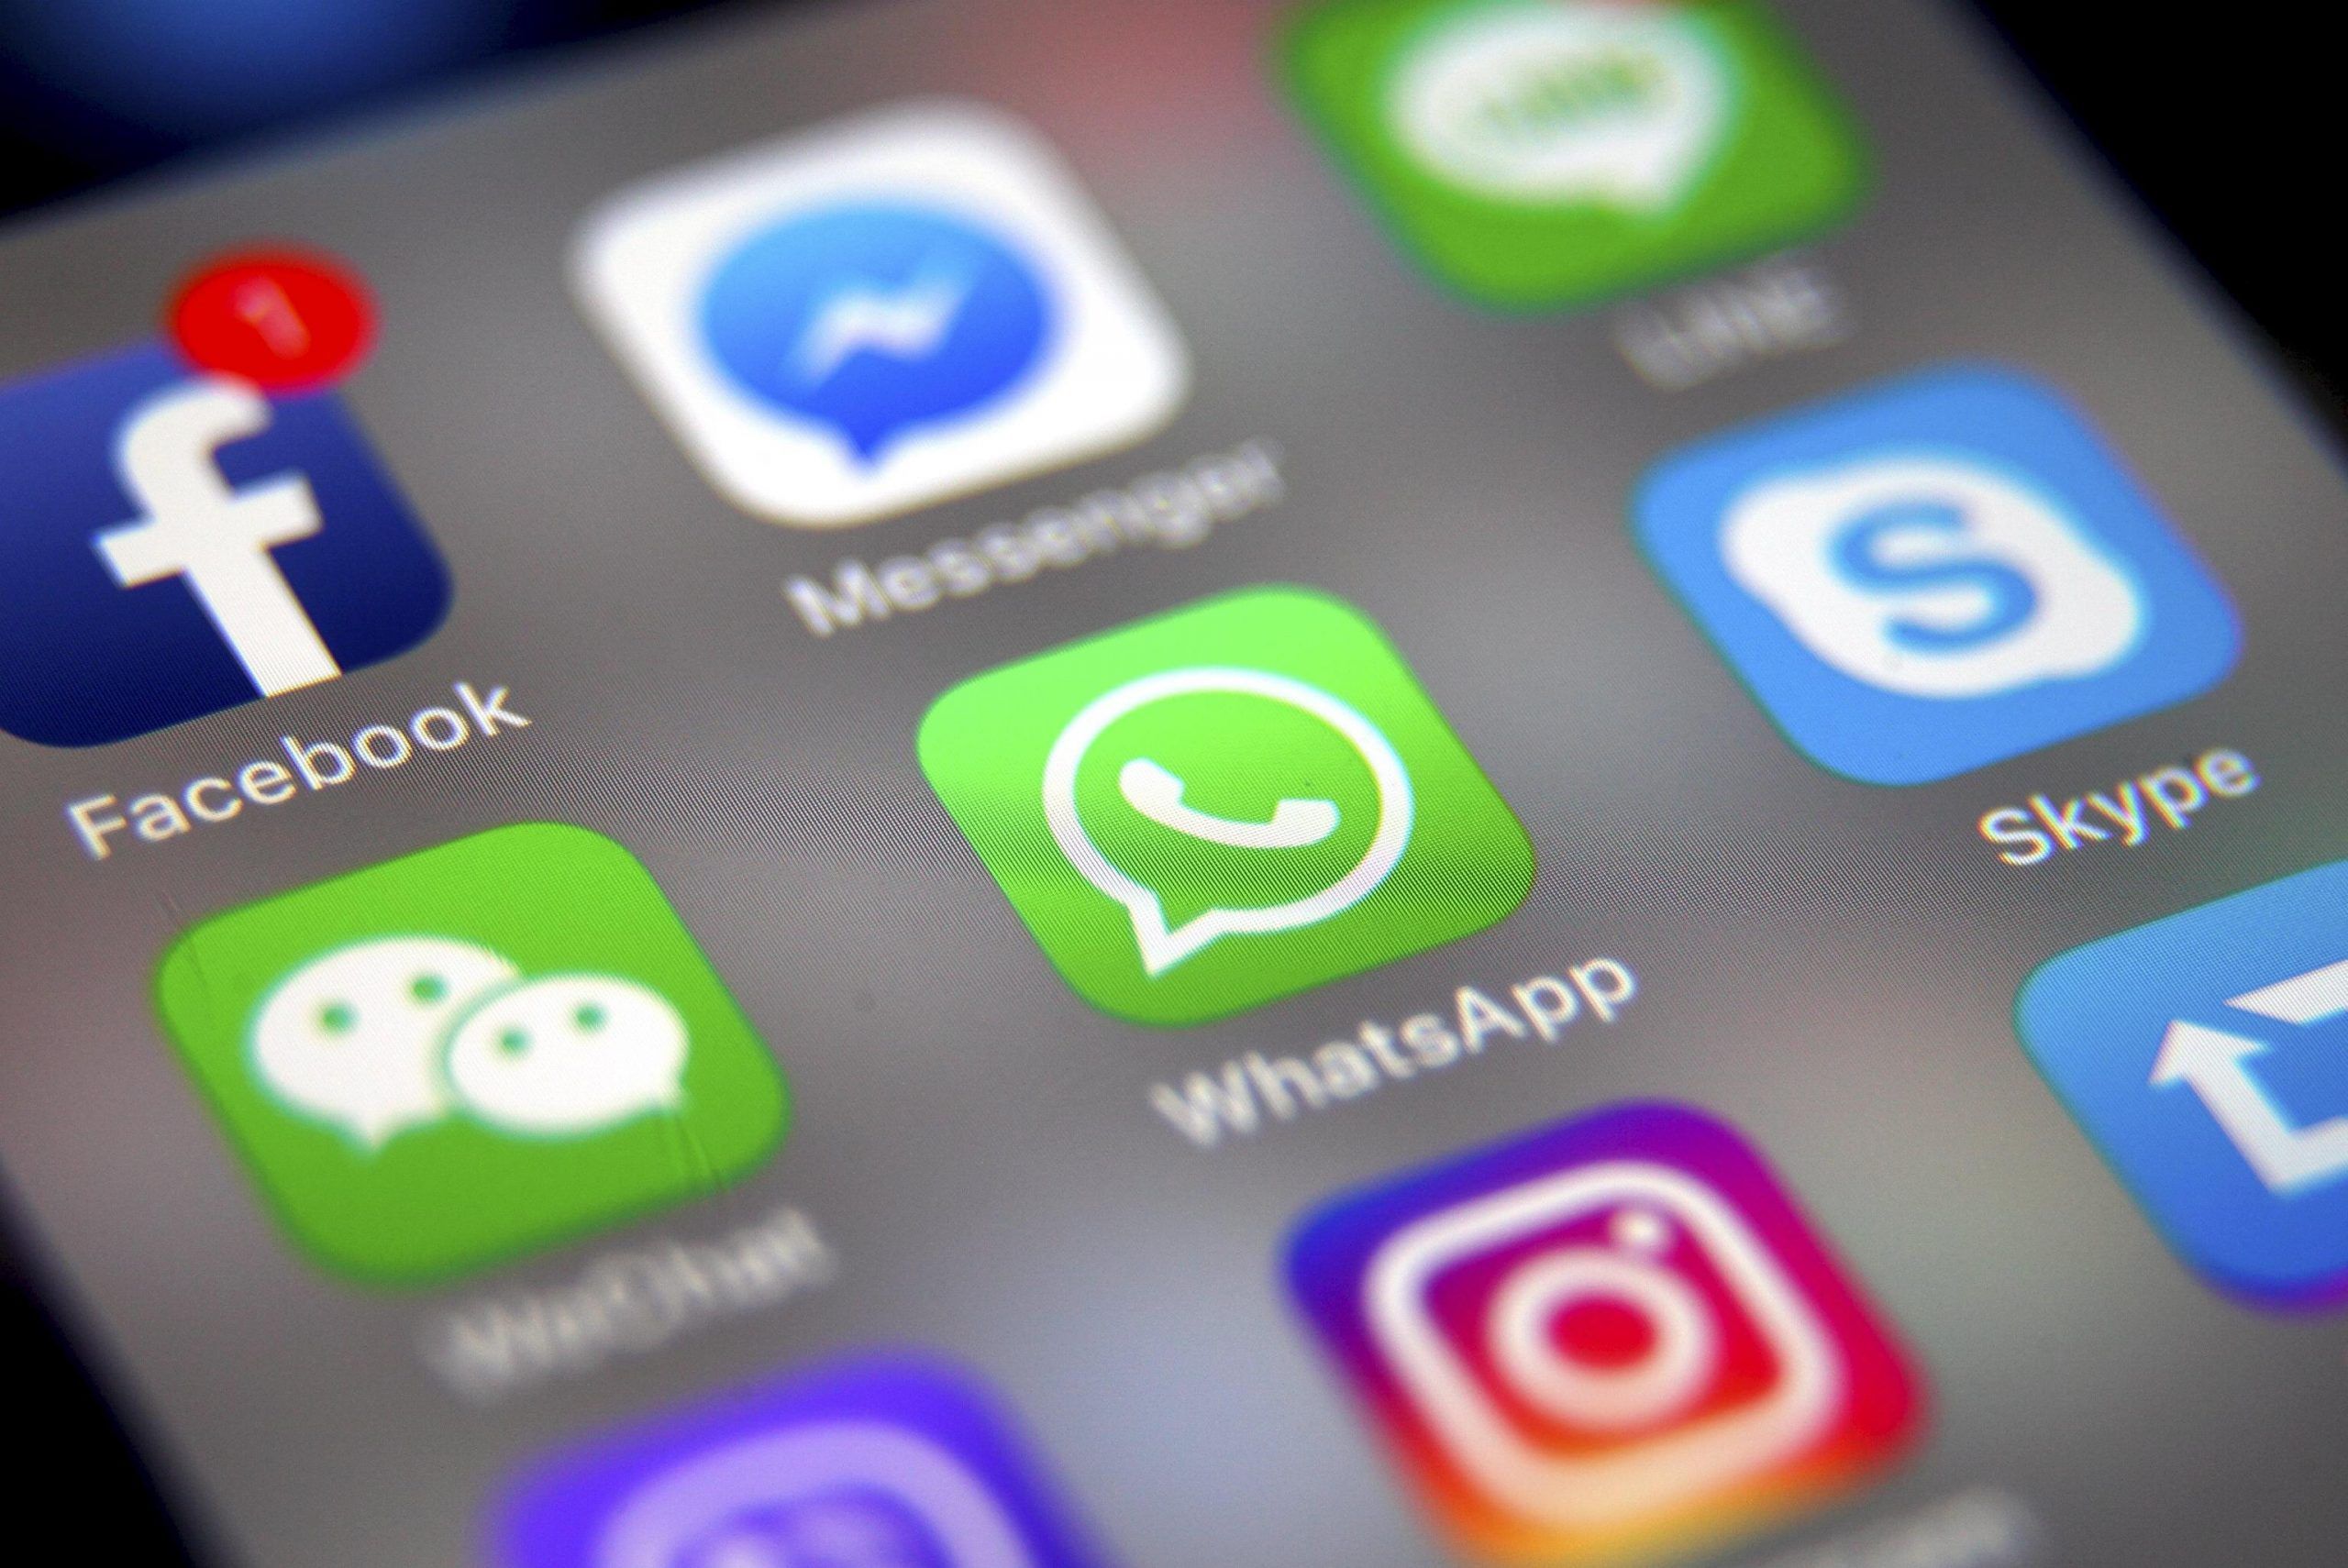 WhatsApp disruptions in China ahead of Communist Party meeting